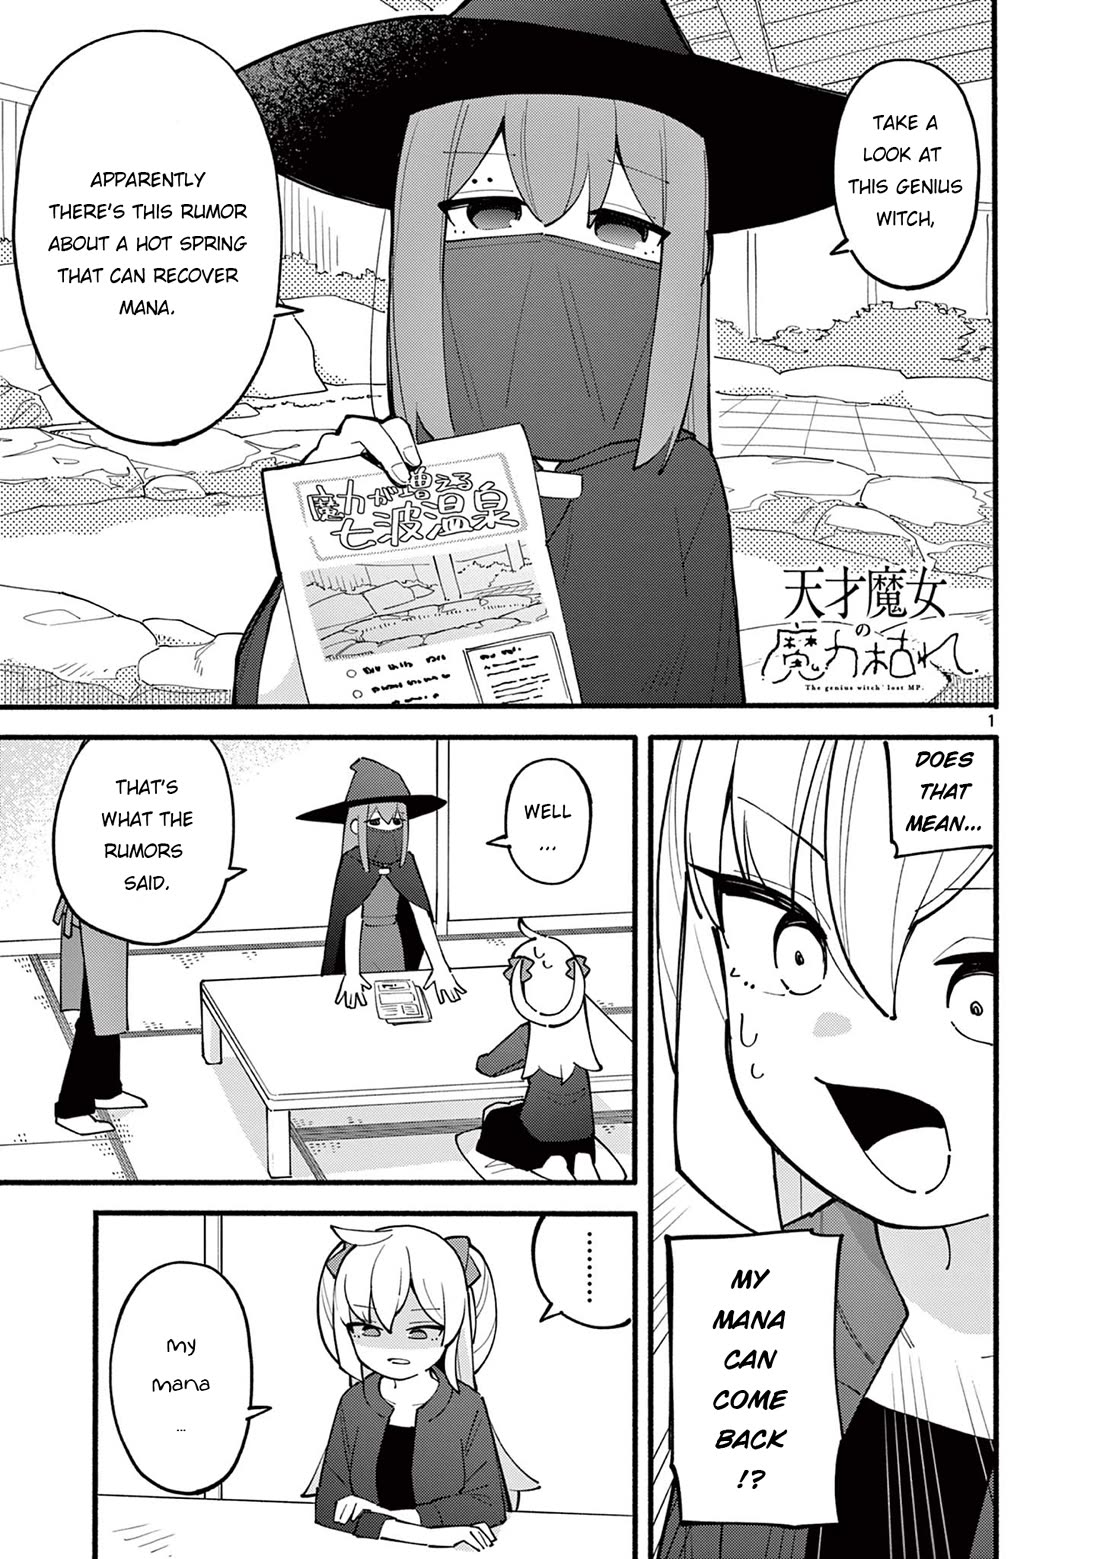 The Genius Witch Lost MP - chapter 17 - #1